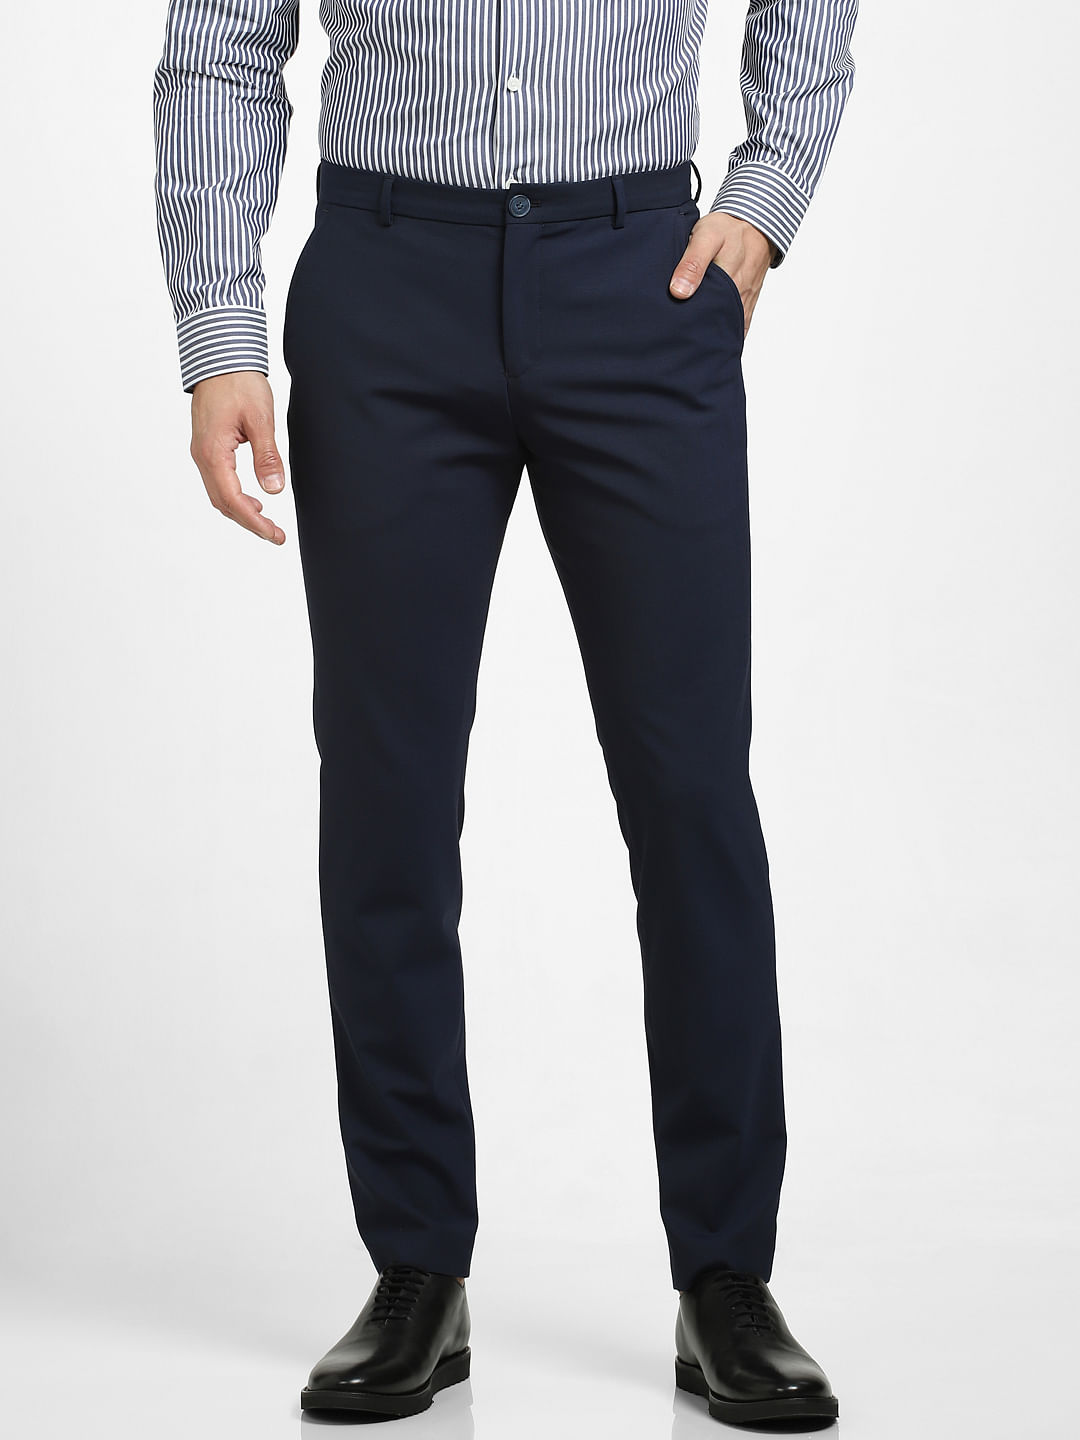 Textured Formal Trousers In Navy B91 Freto